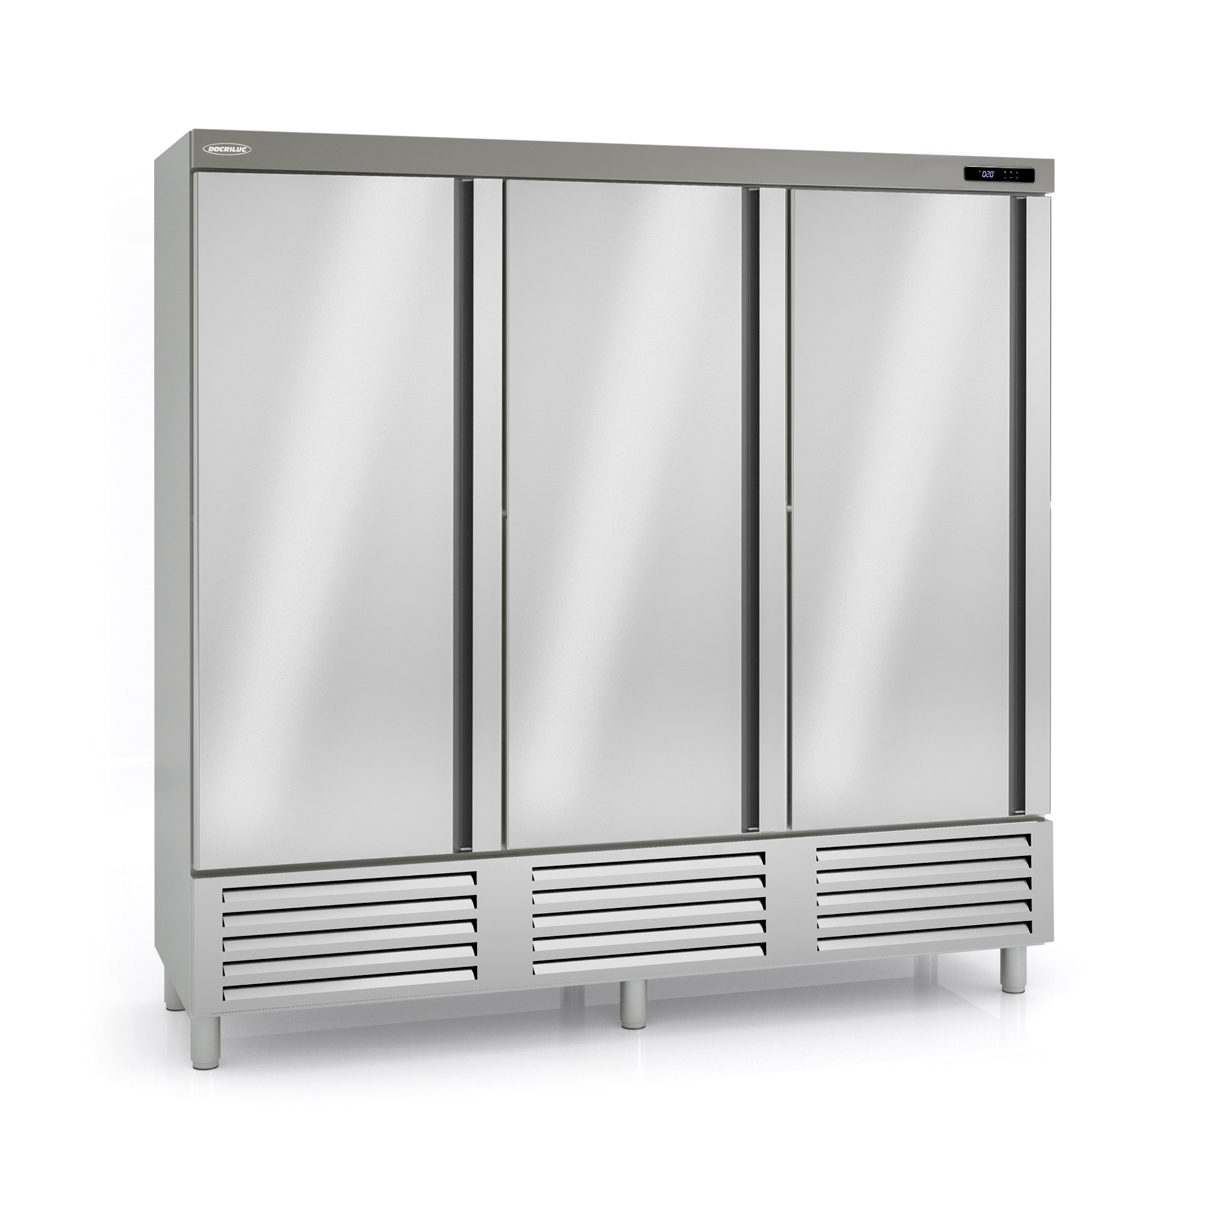 Snack Refrigerated Cabinet ARS-210-3